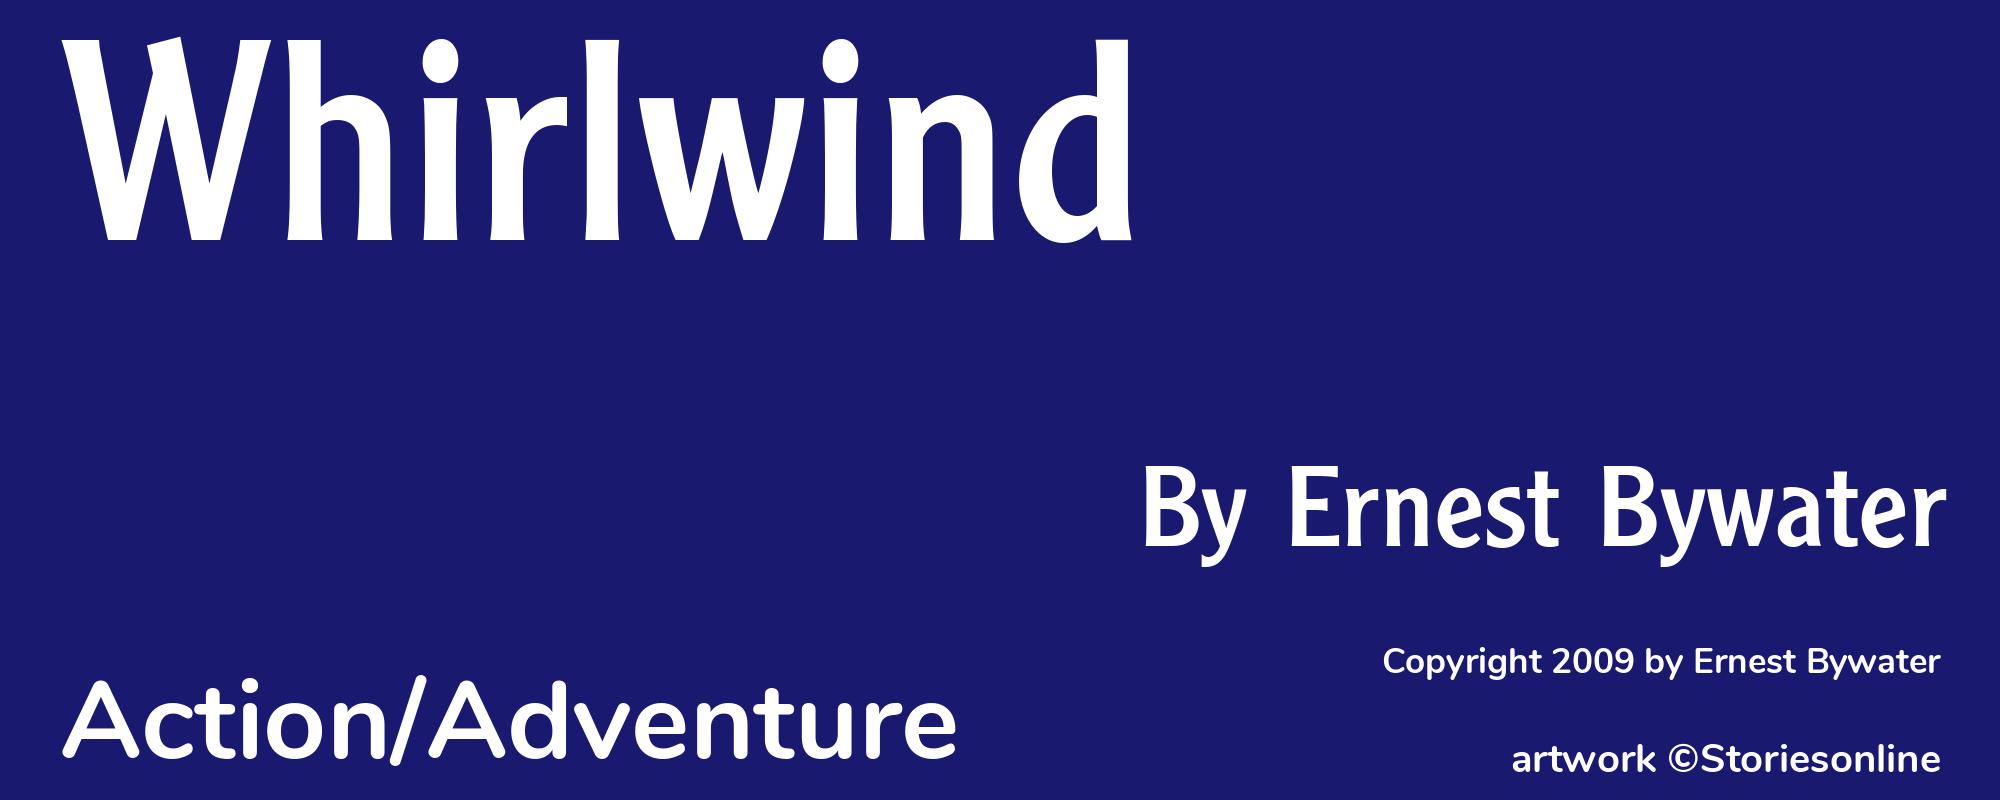 Whirlwind - Cover